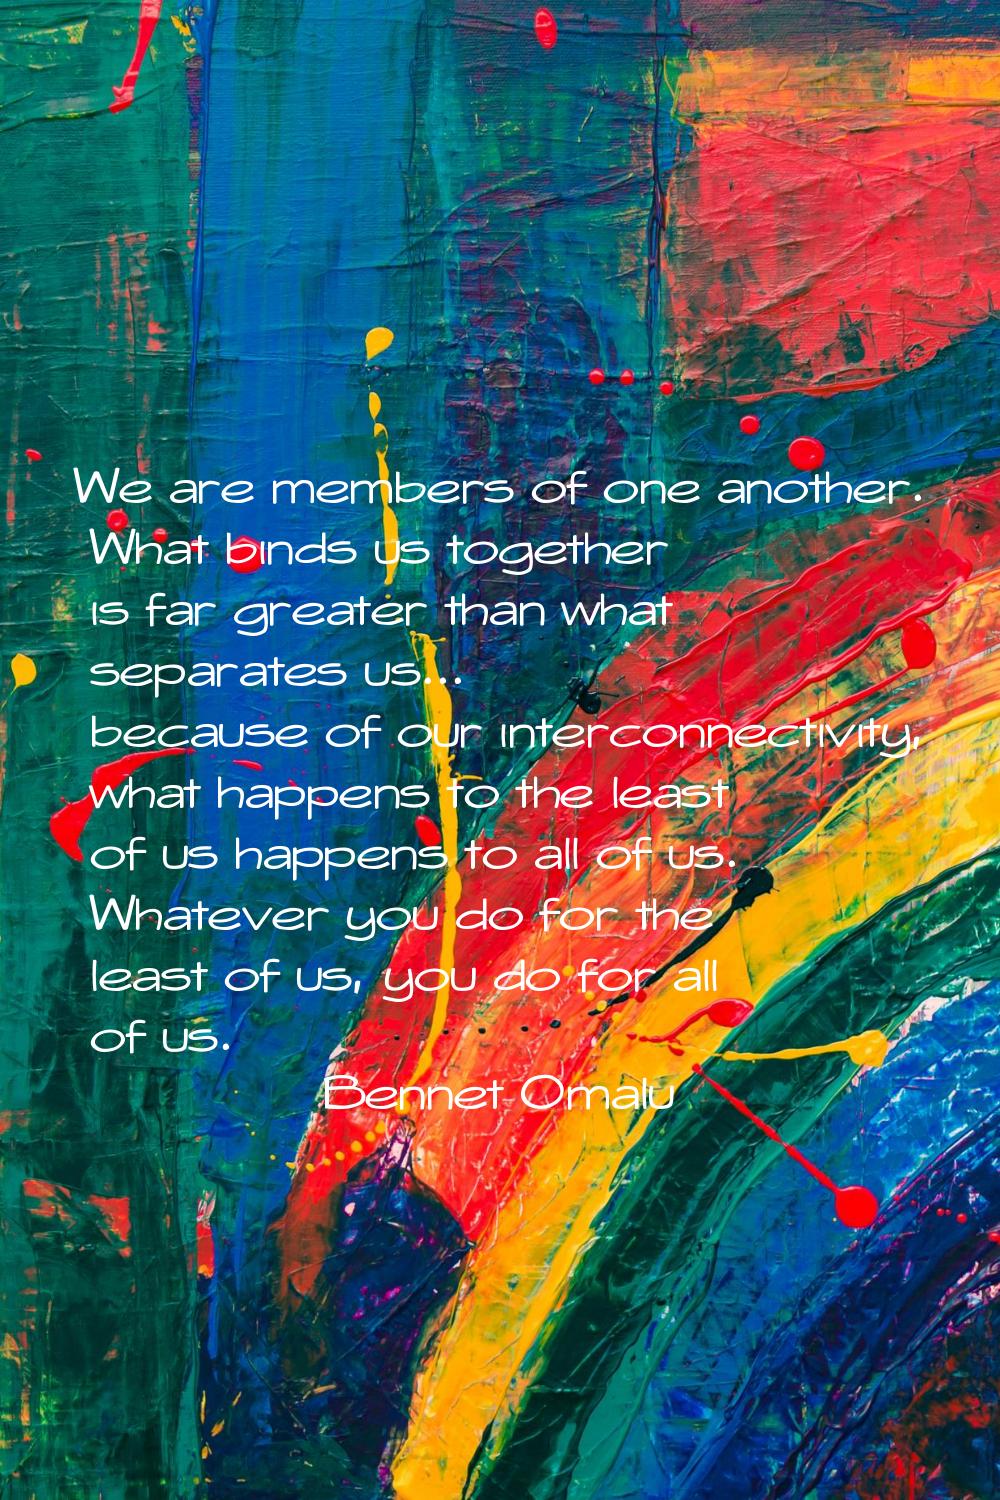 We are members of one another. What binds us together is far greater than what separates us... beca